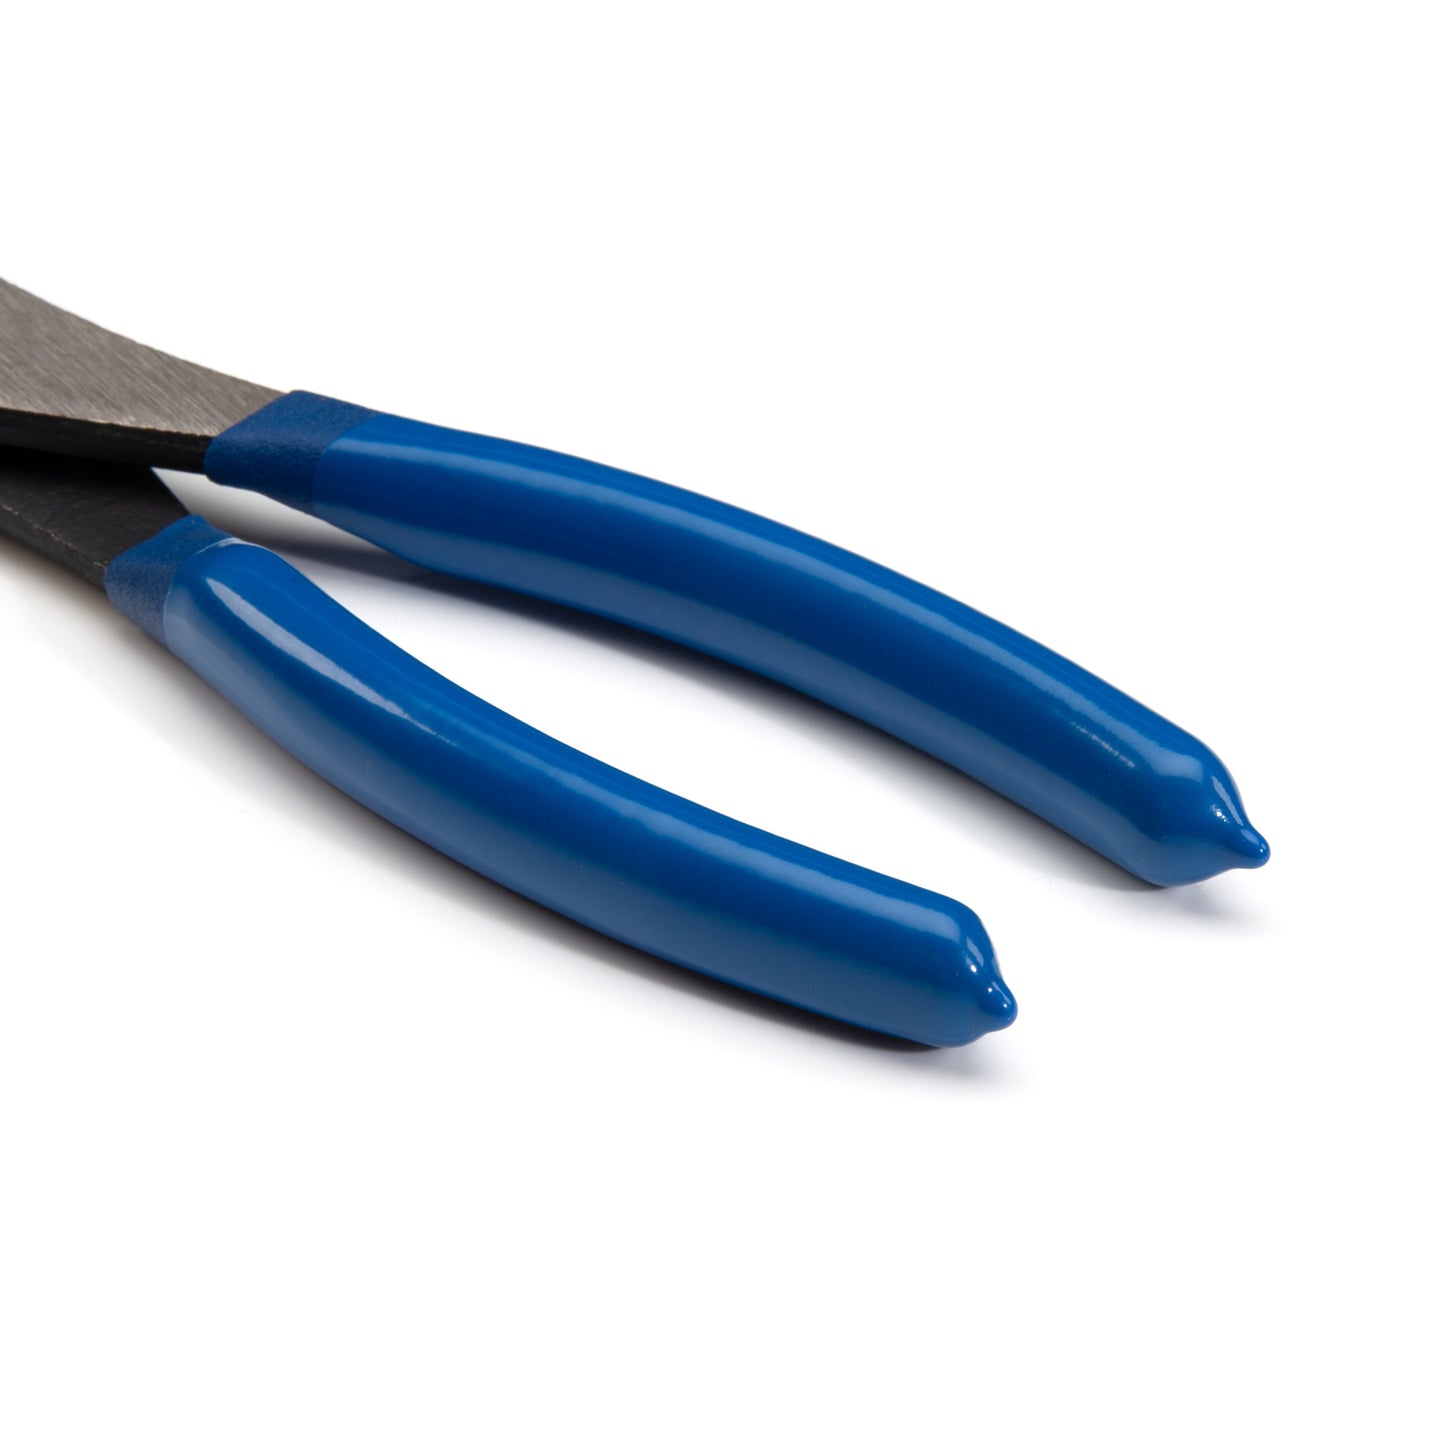 8-Inch Long Slip-Joint Pliers with Wire Cutter and Dual Layer Blue Grip